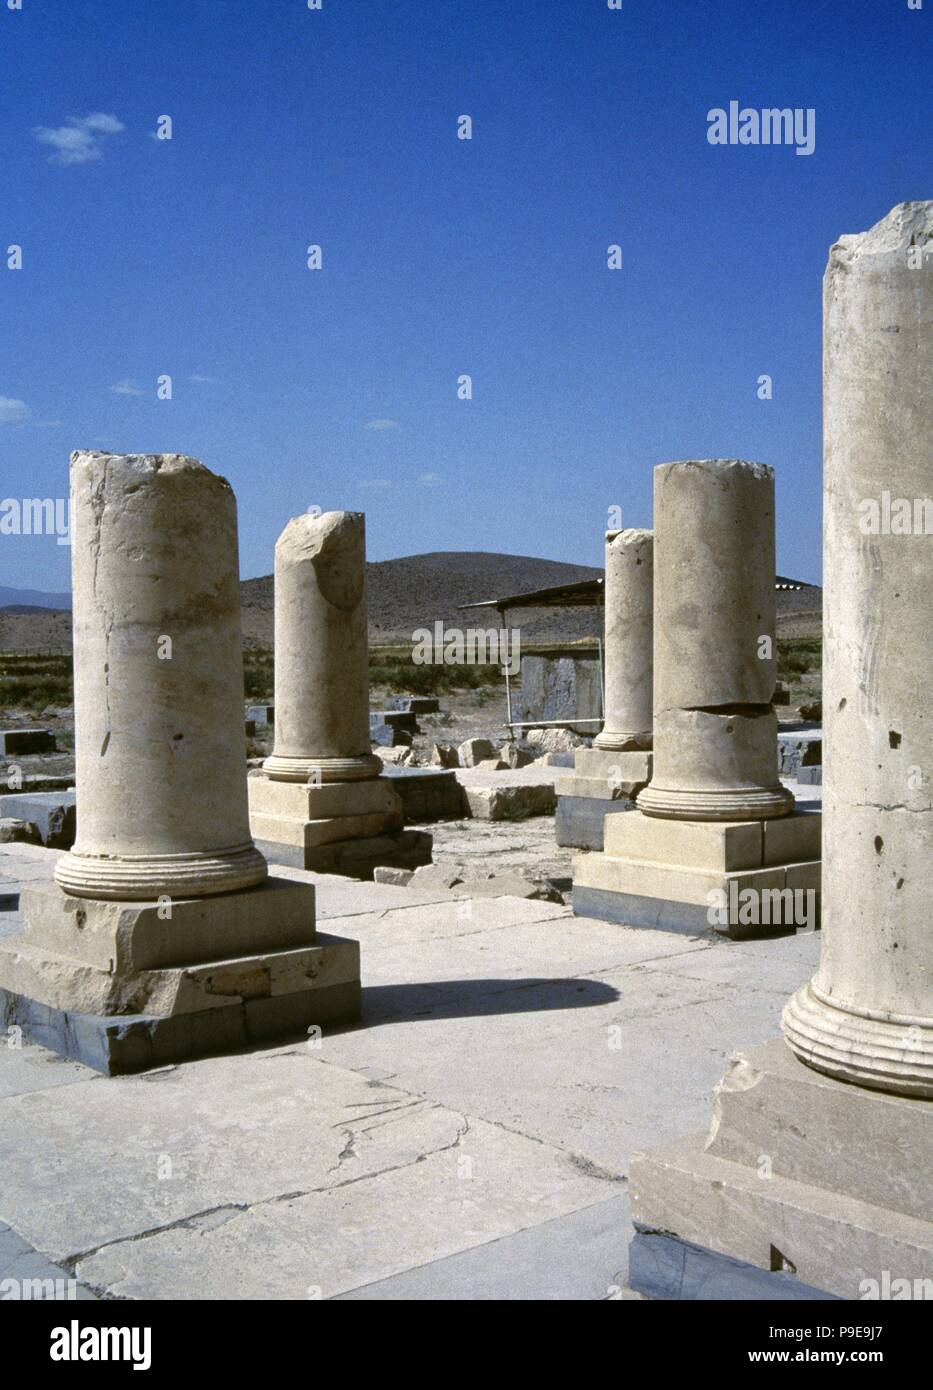 Pasargadae, Iran. Ruins of the Great's private Palace. It was the private palace of Cyrus the Great, Achaemenid king of Persia (559-530 BC), the founder of the Achaemenid Empire. Pasargadae was the capital of the Achaemenid Empire under Cyrus the Great, who had issued its construction. Stock Photo